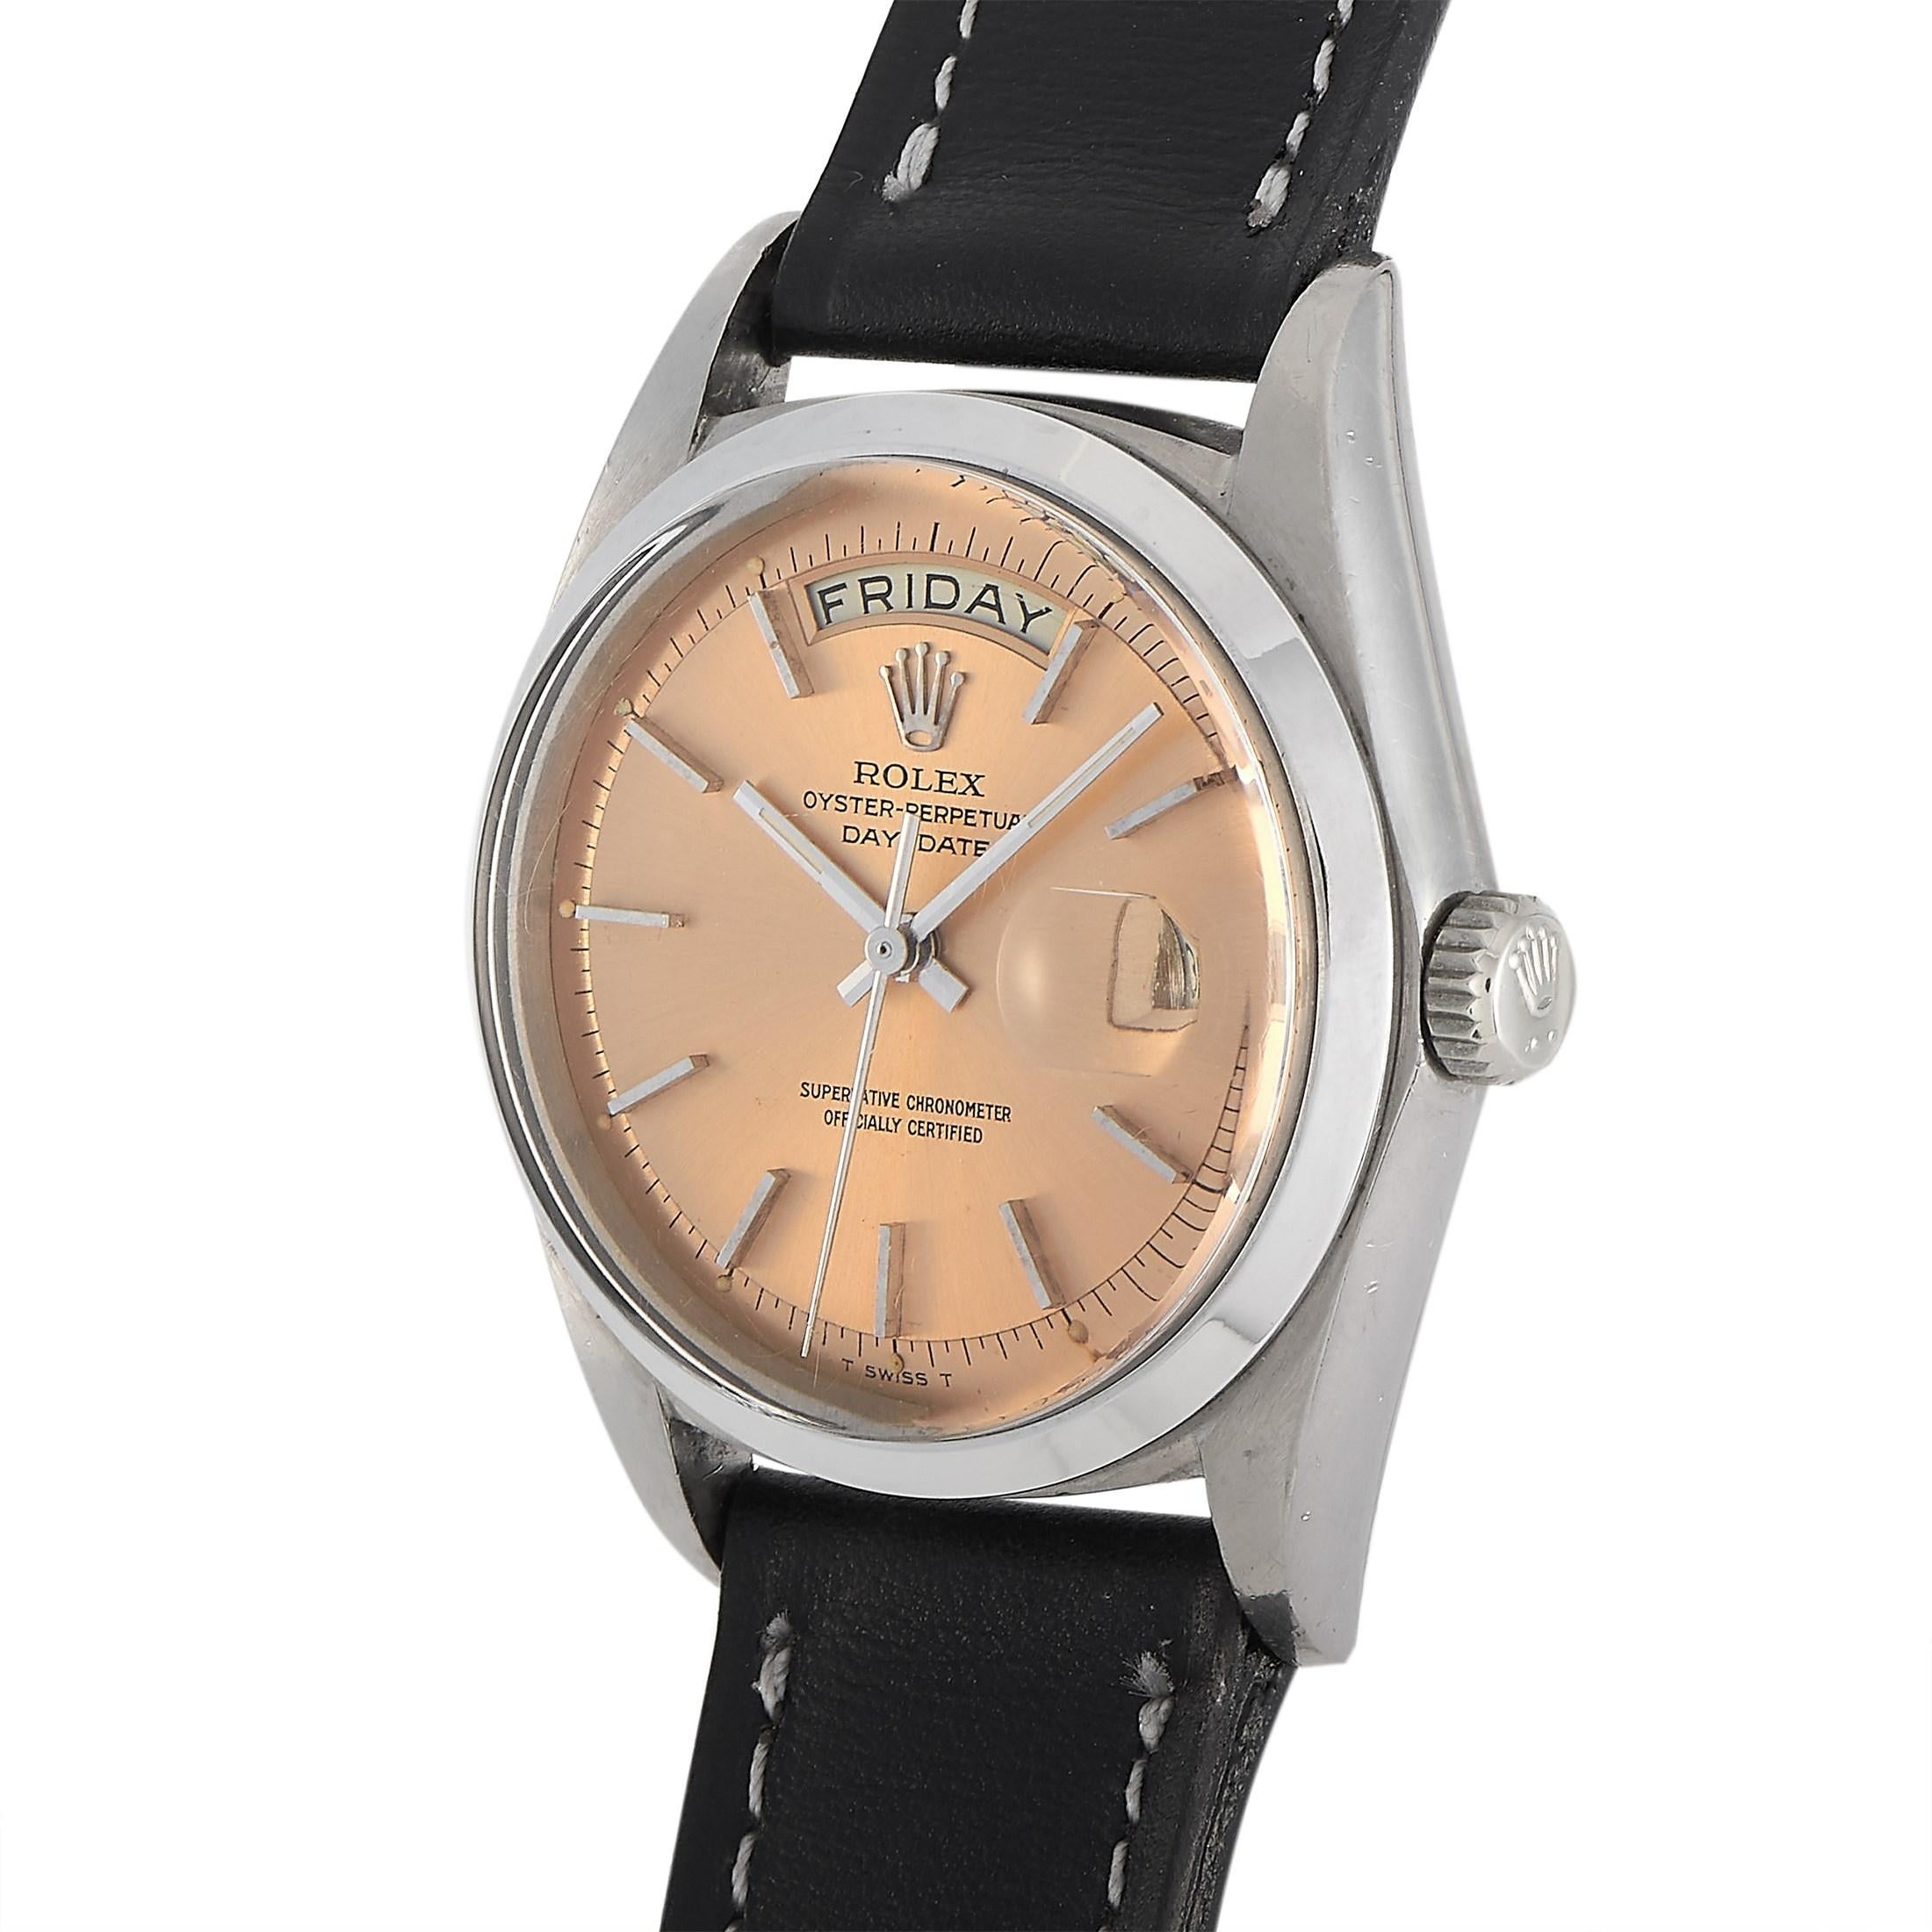 The Rolex Day-Date Watch, reference number 1802, is a functional timepiece that will never go out of style. 

This watch begins with a 36mm case crafted from shimmering 18K white gold, which contrasts beautifully against the black leather strap. On